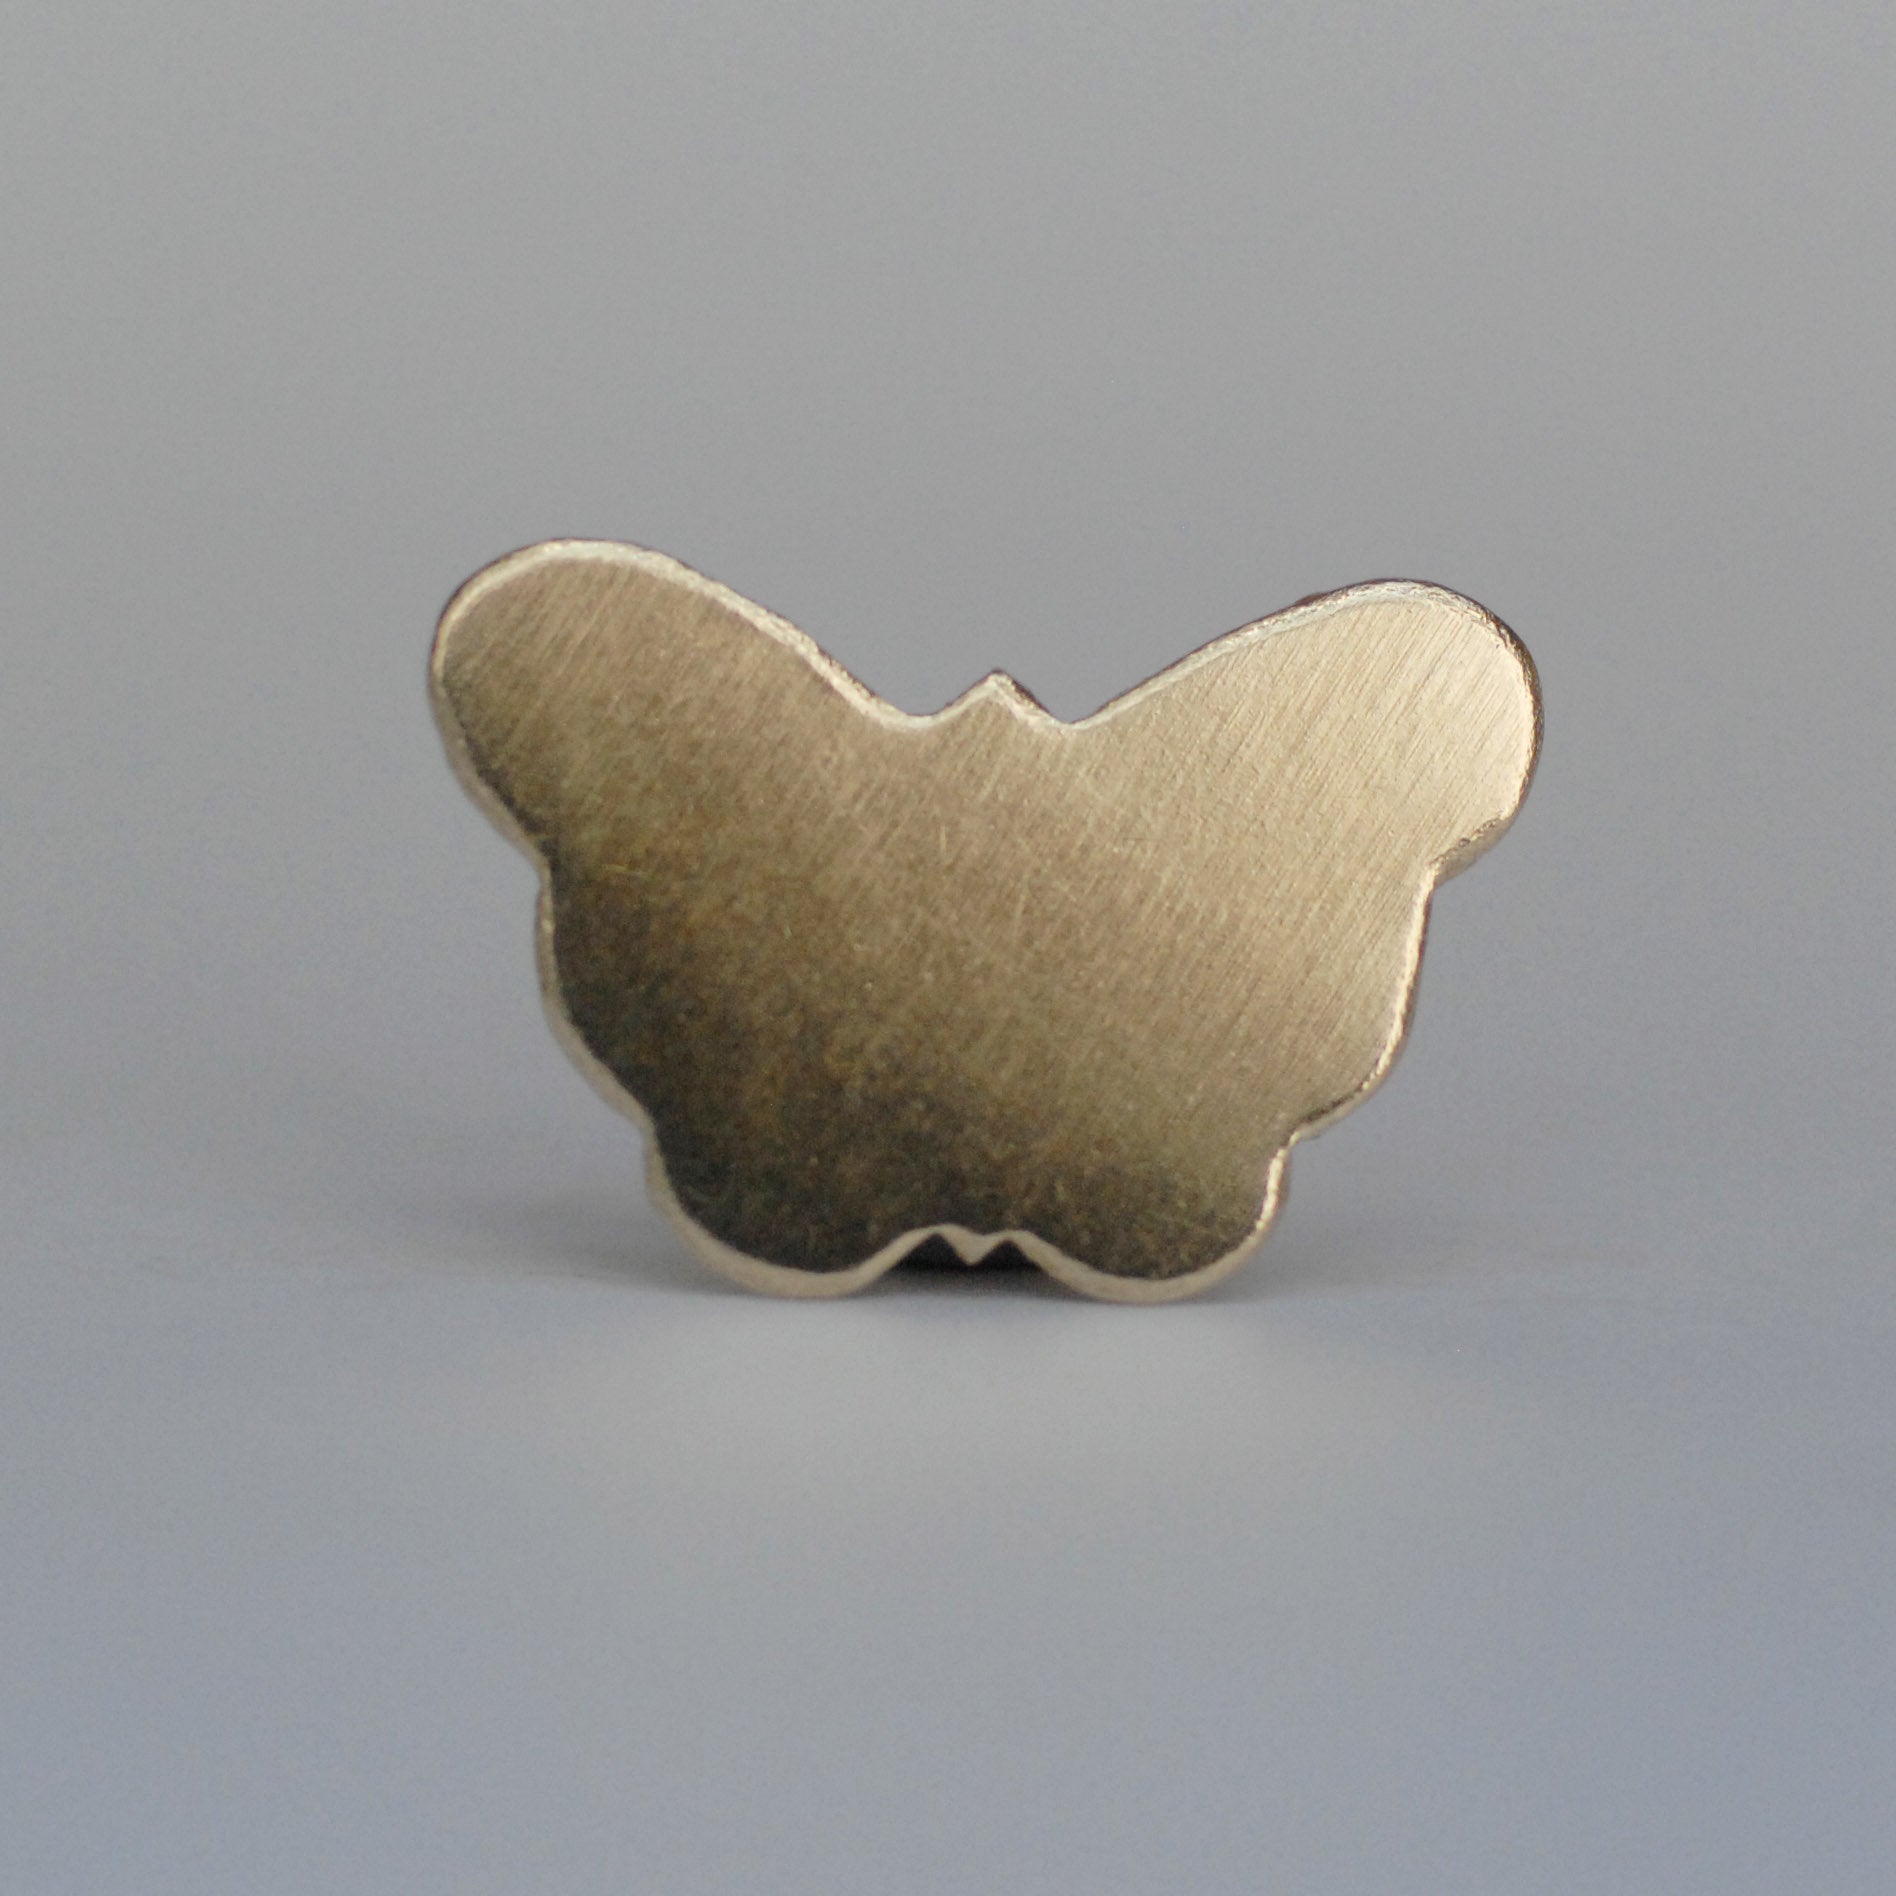 Small butterfly shapes for making jewelry, metal blanks copper, brass, bronze, nickel silver 24g 22g 20g